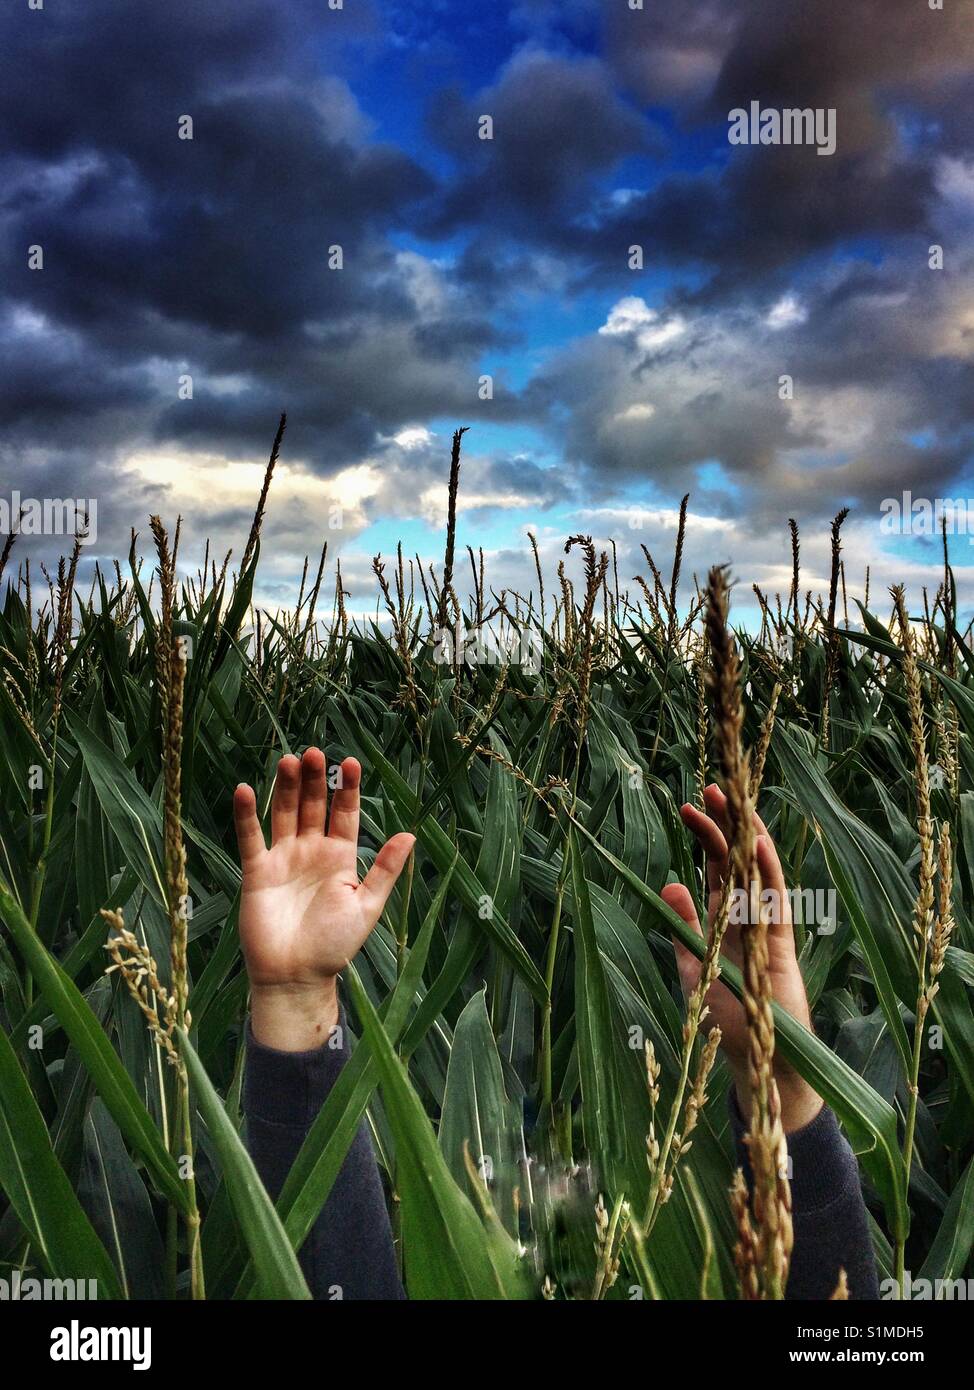 A pair of human hands reaching up skywards for help as if drowning in a field of tall maize. Stock Photo